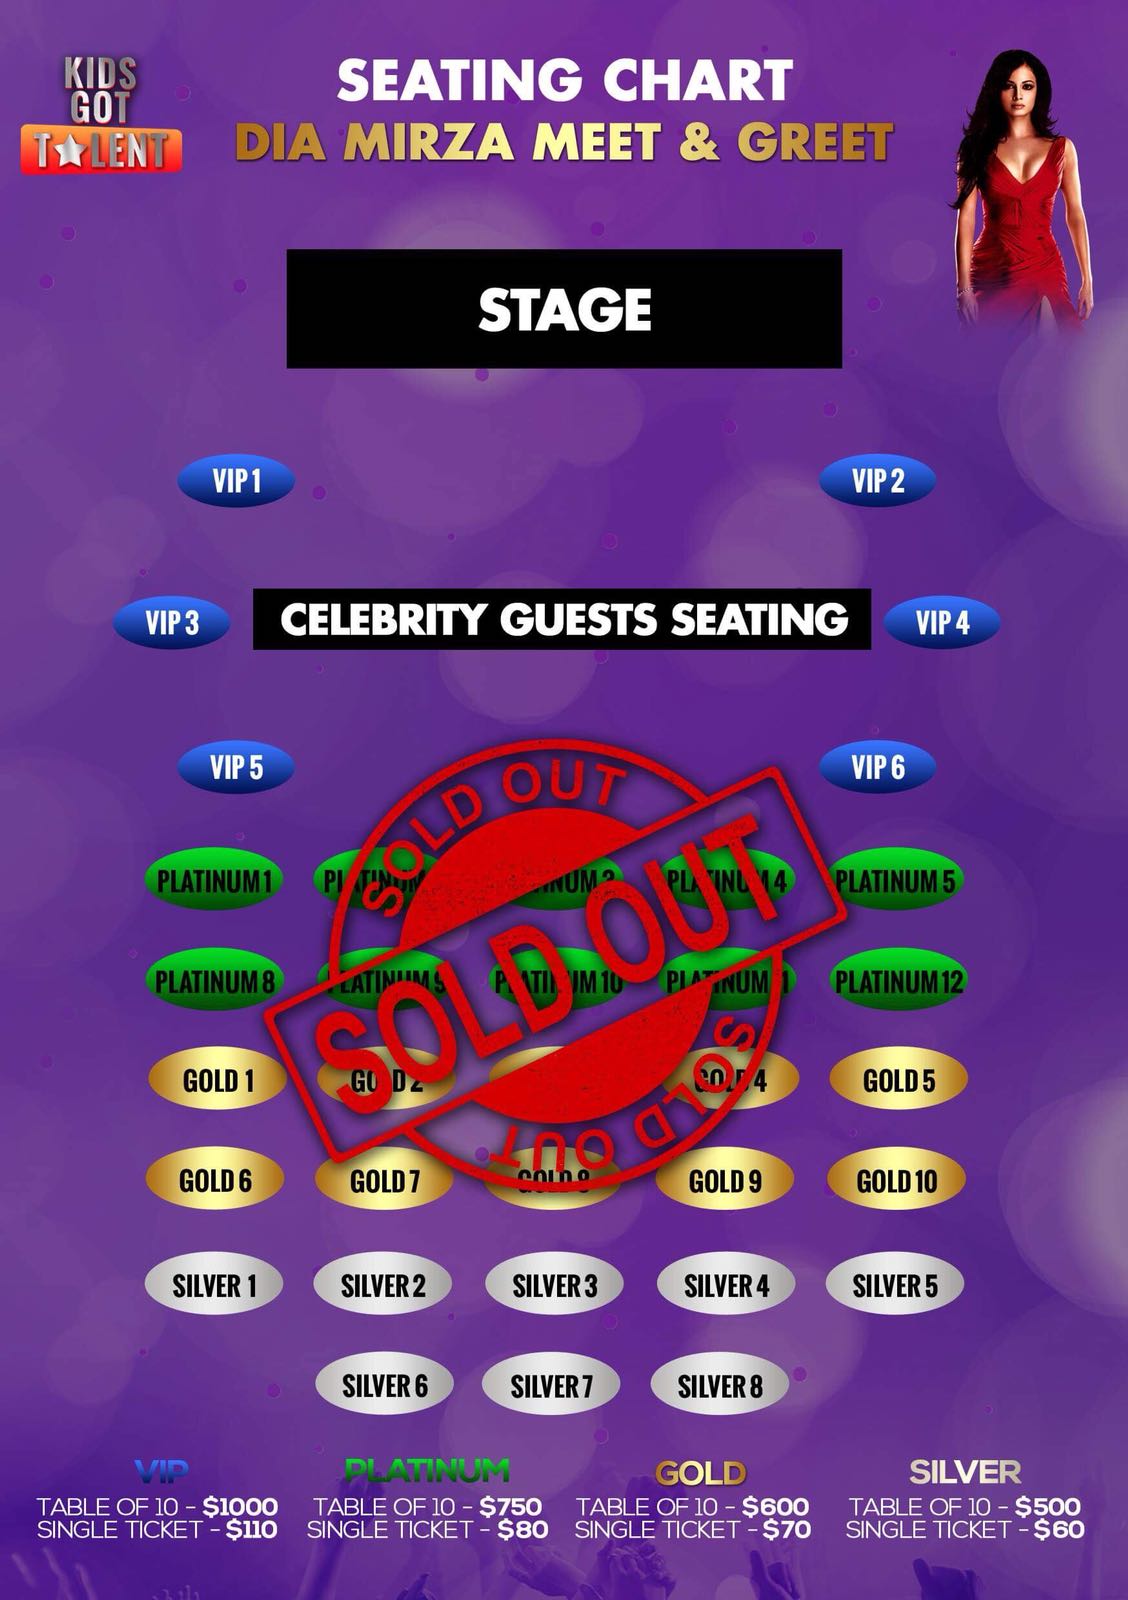 Kids Got Talent and Meet & Greet Dia Mirza In Melbourne Seating Map